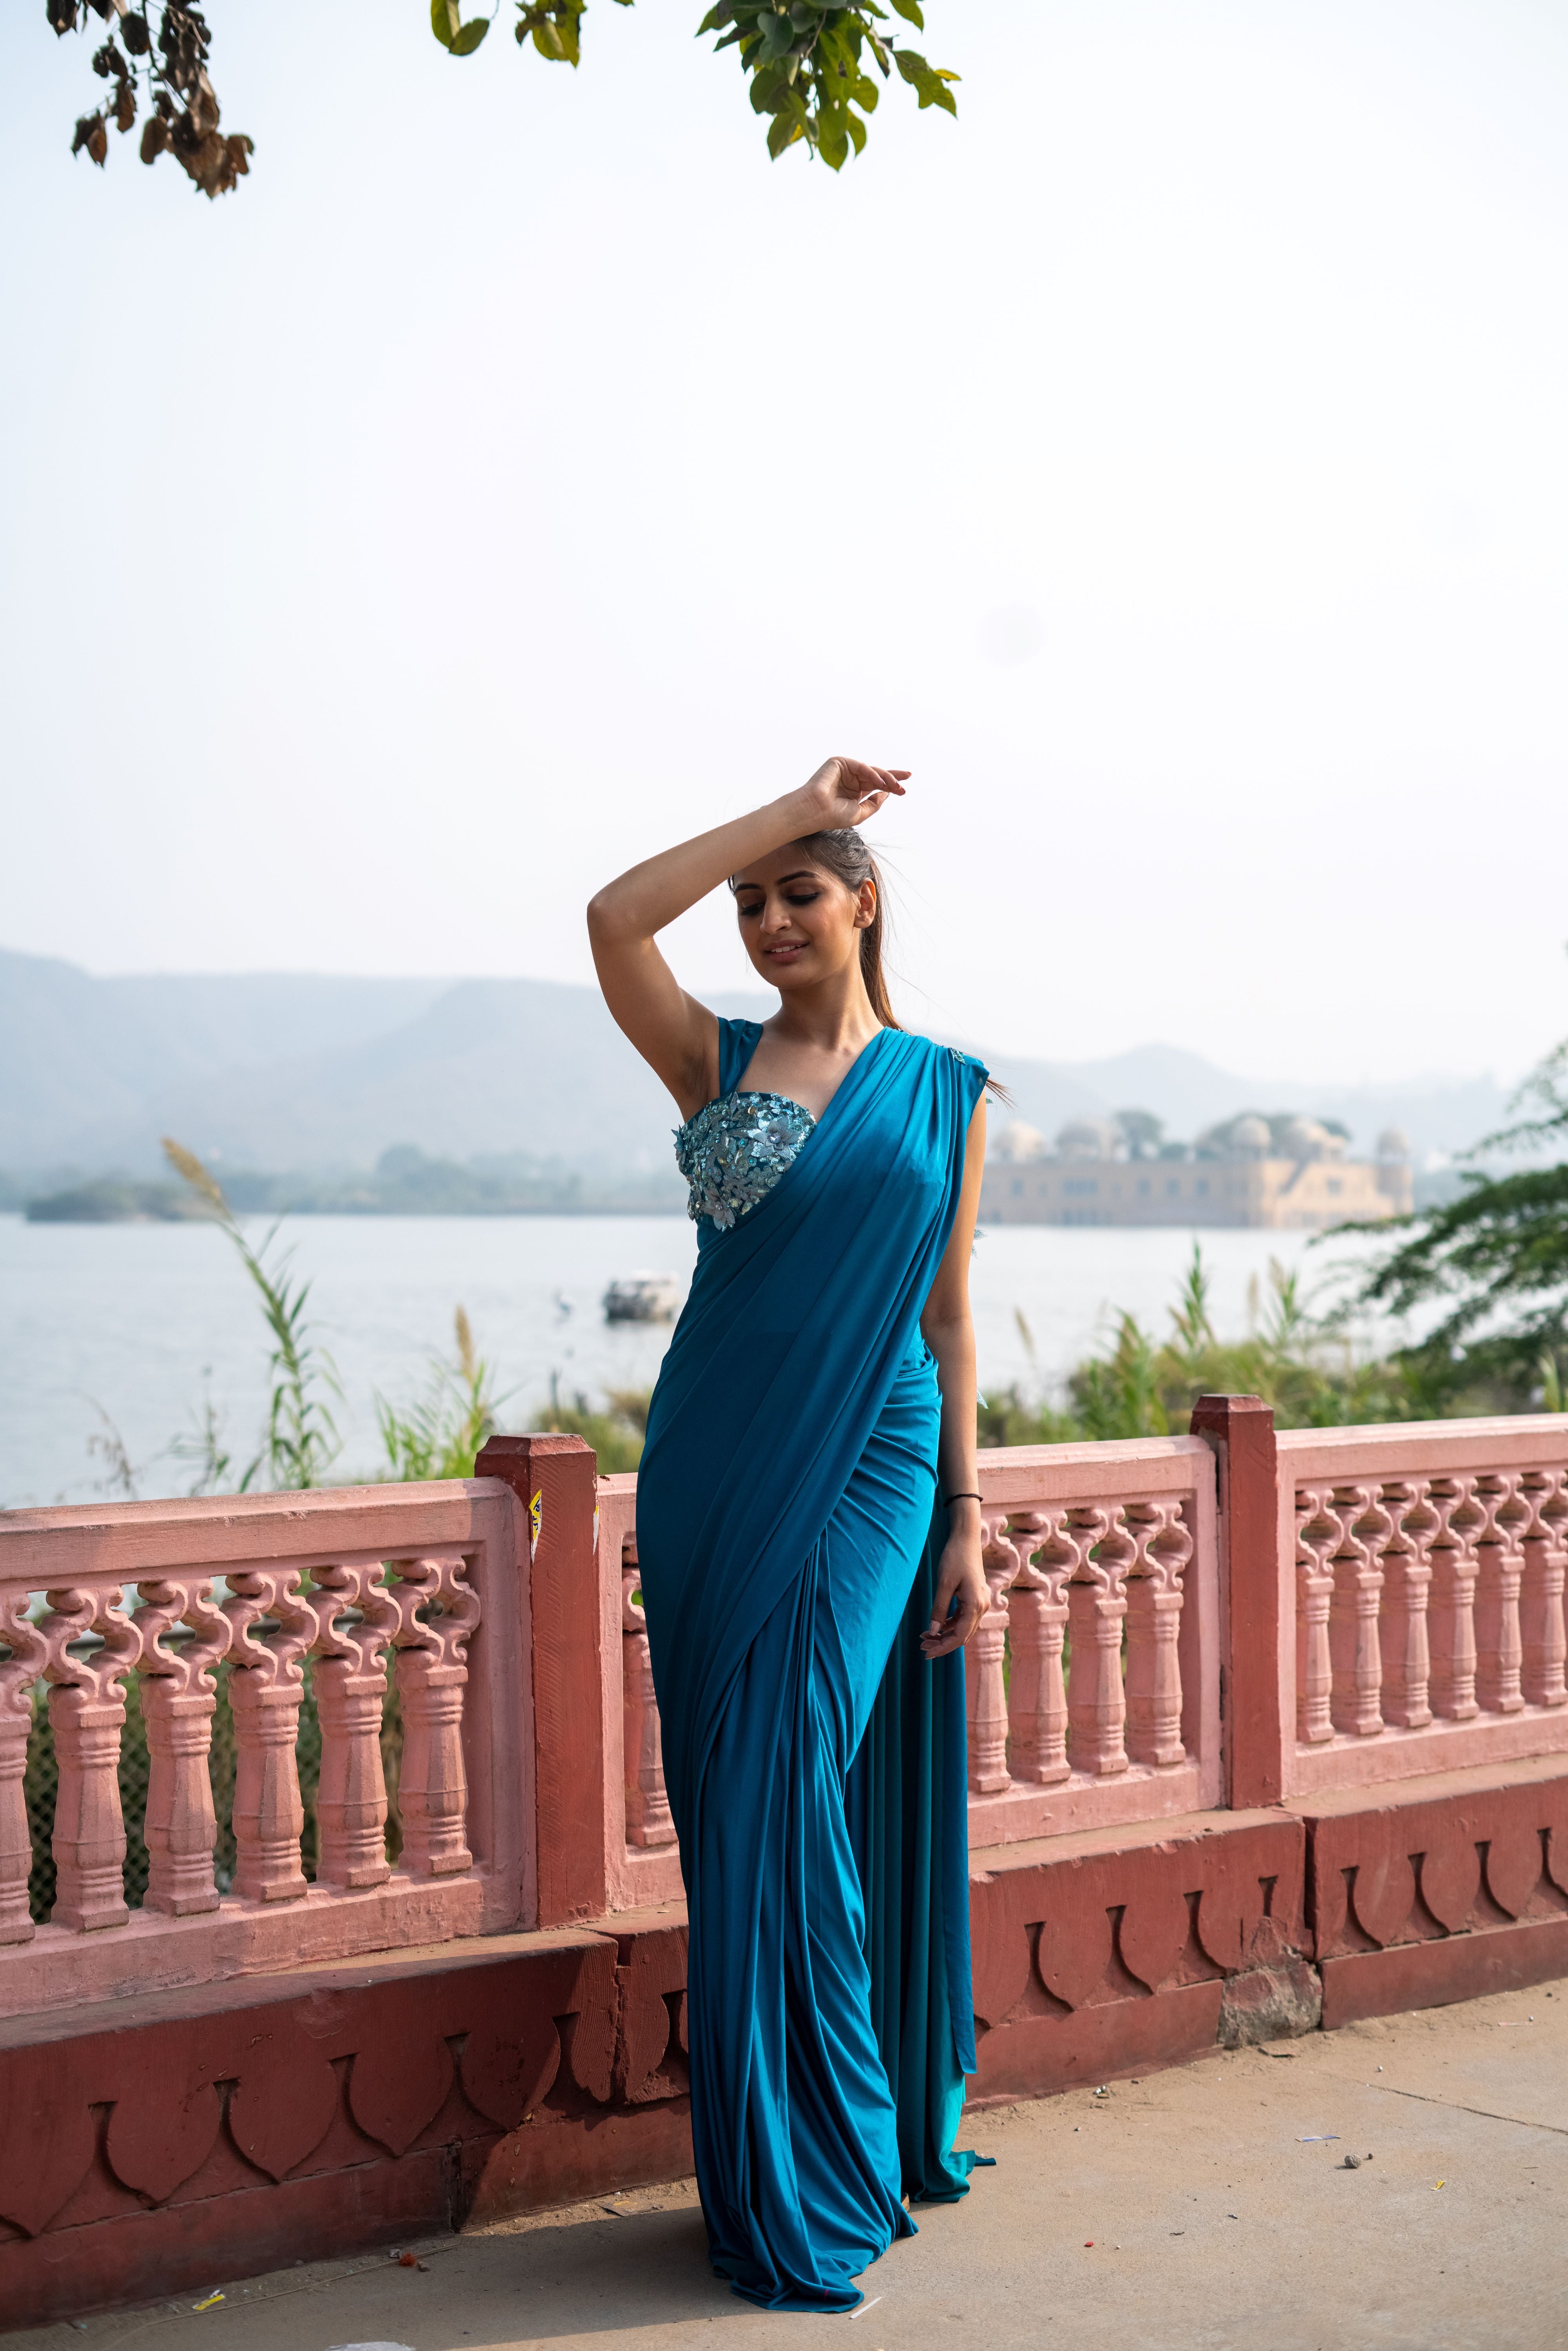 TCR Teal Blue Ready To Wear Pre Stitched Saree With Embellished Blouse!